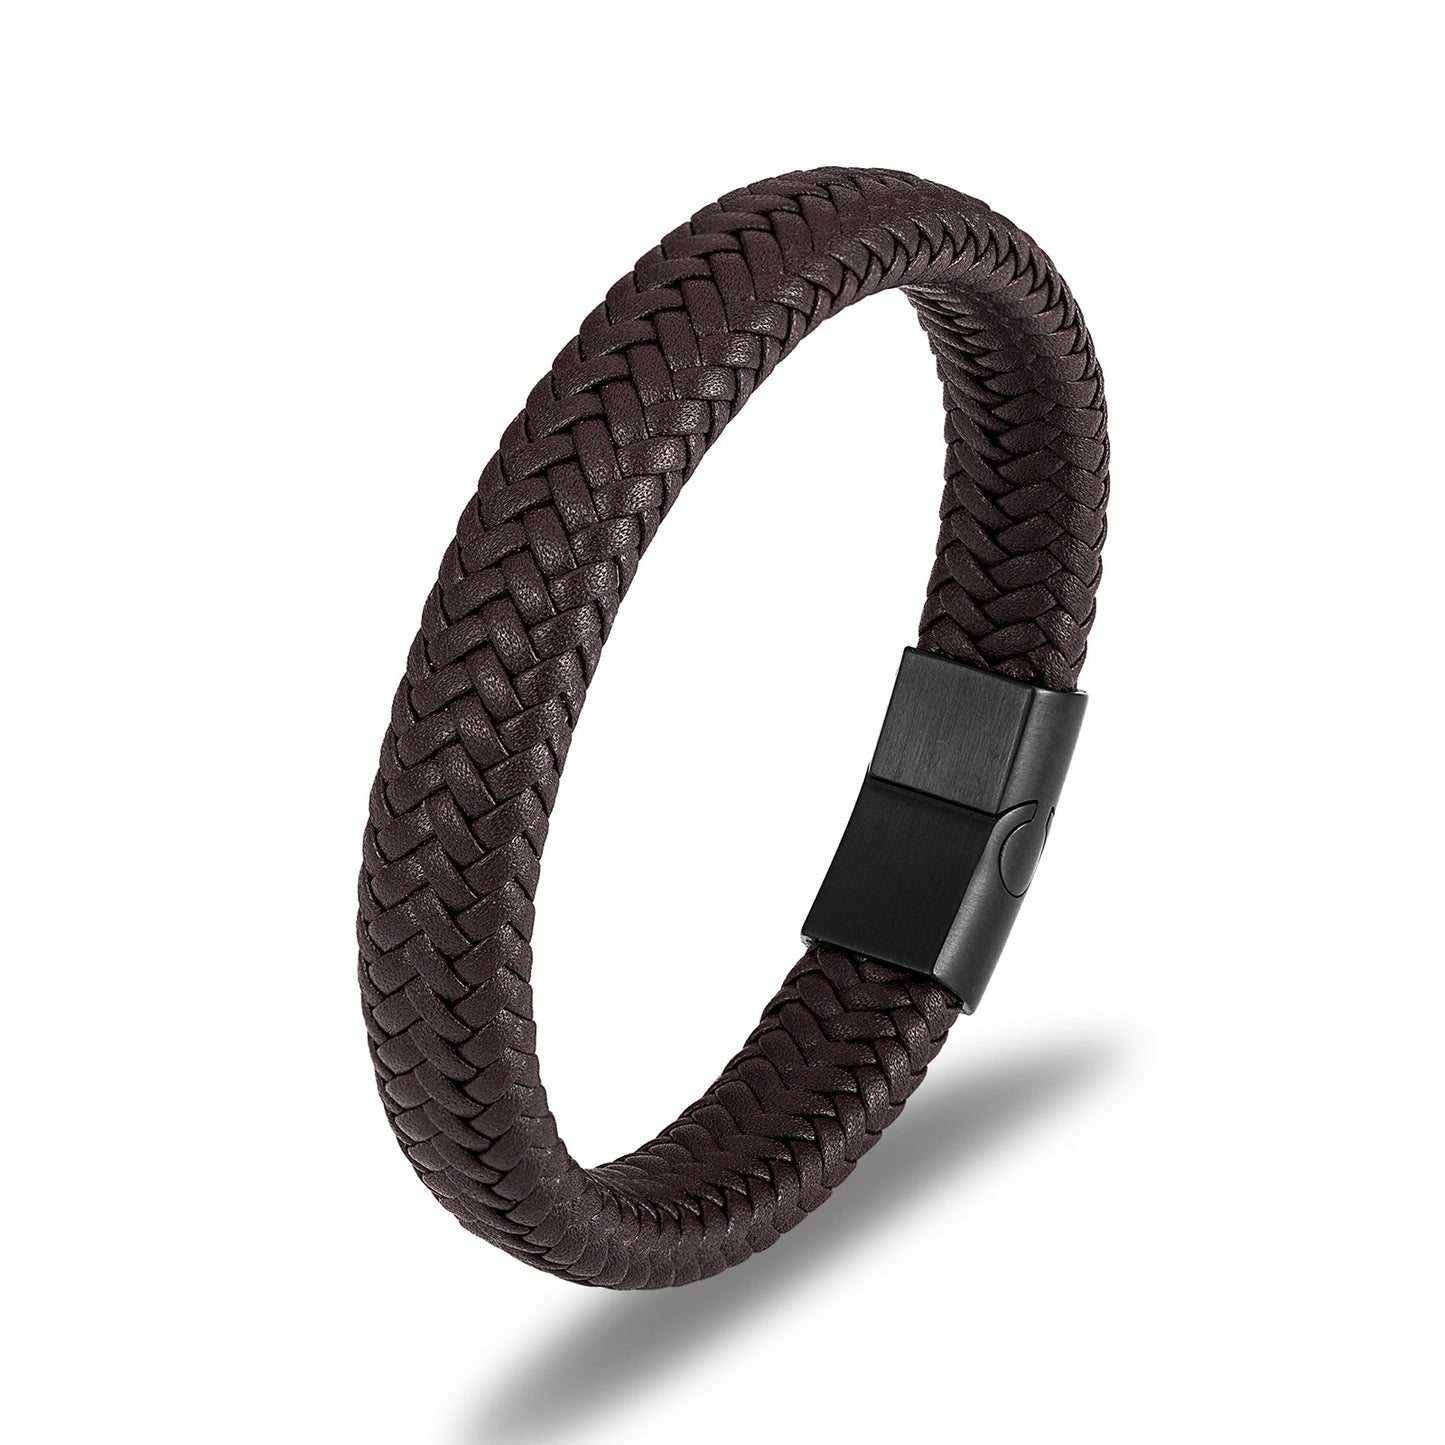 Men's Fashion Woven Leather Simplicity Stainless Steel Bracelets